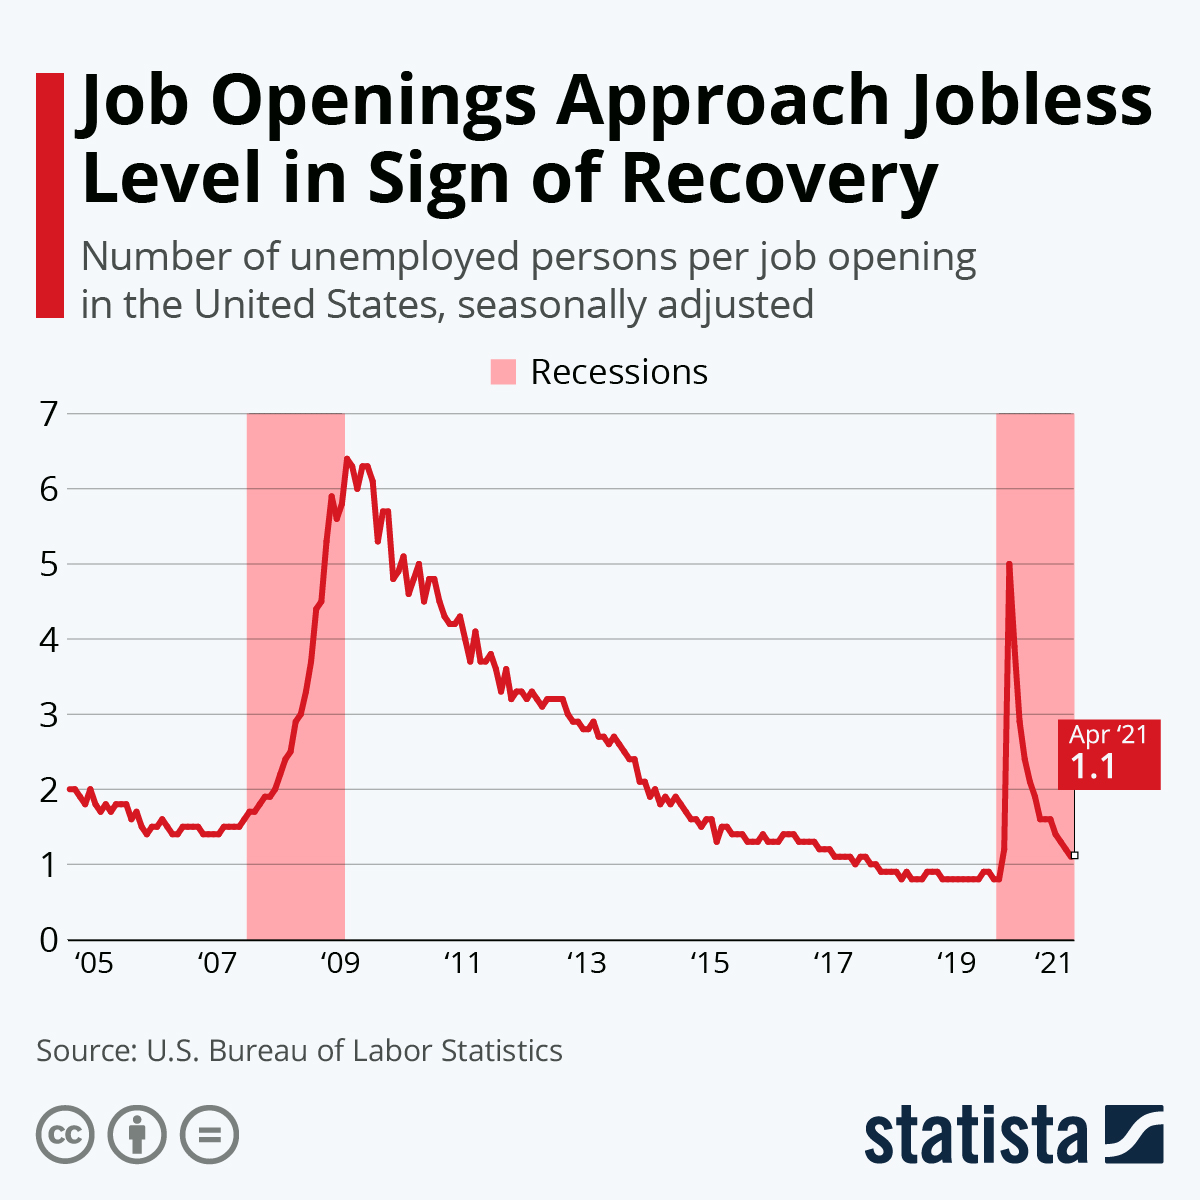 Job Openings Approach Jobless Level in Sign of Recovery